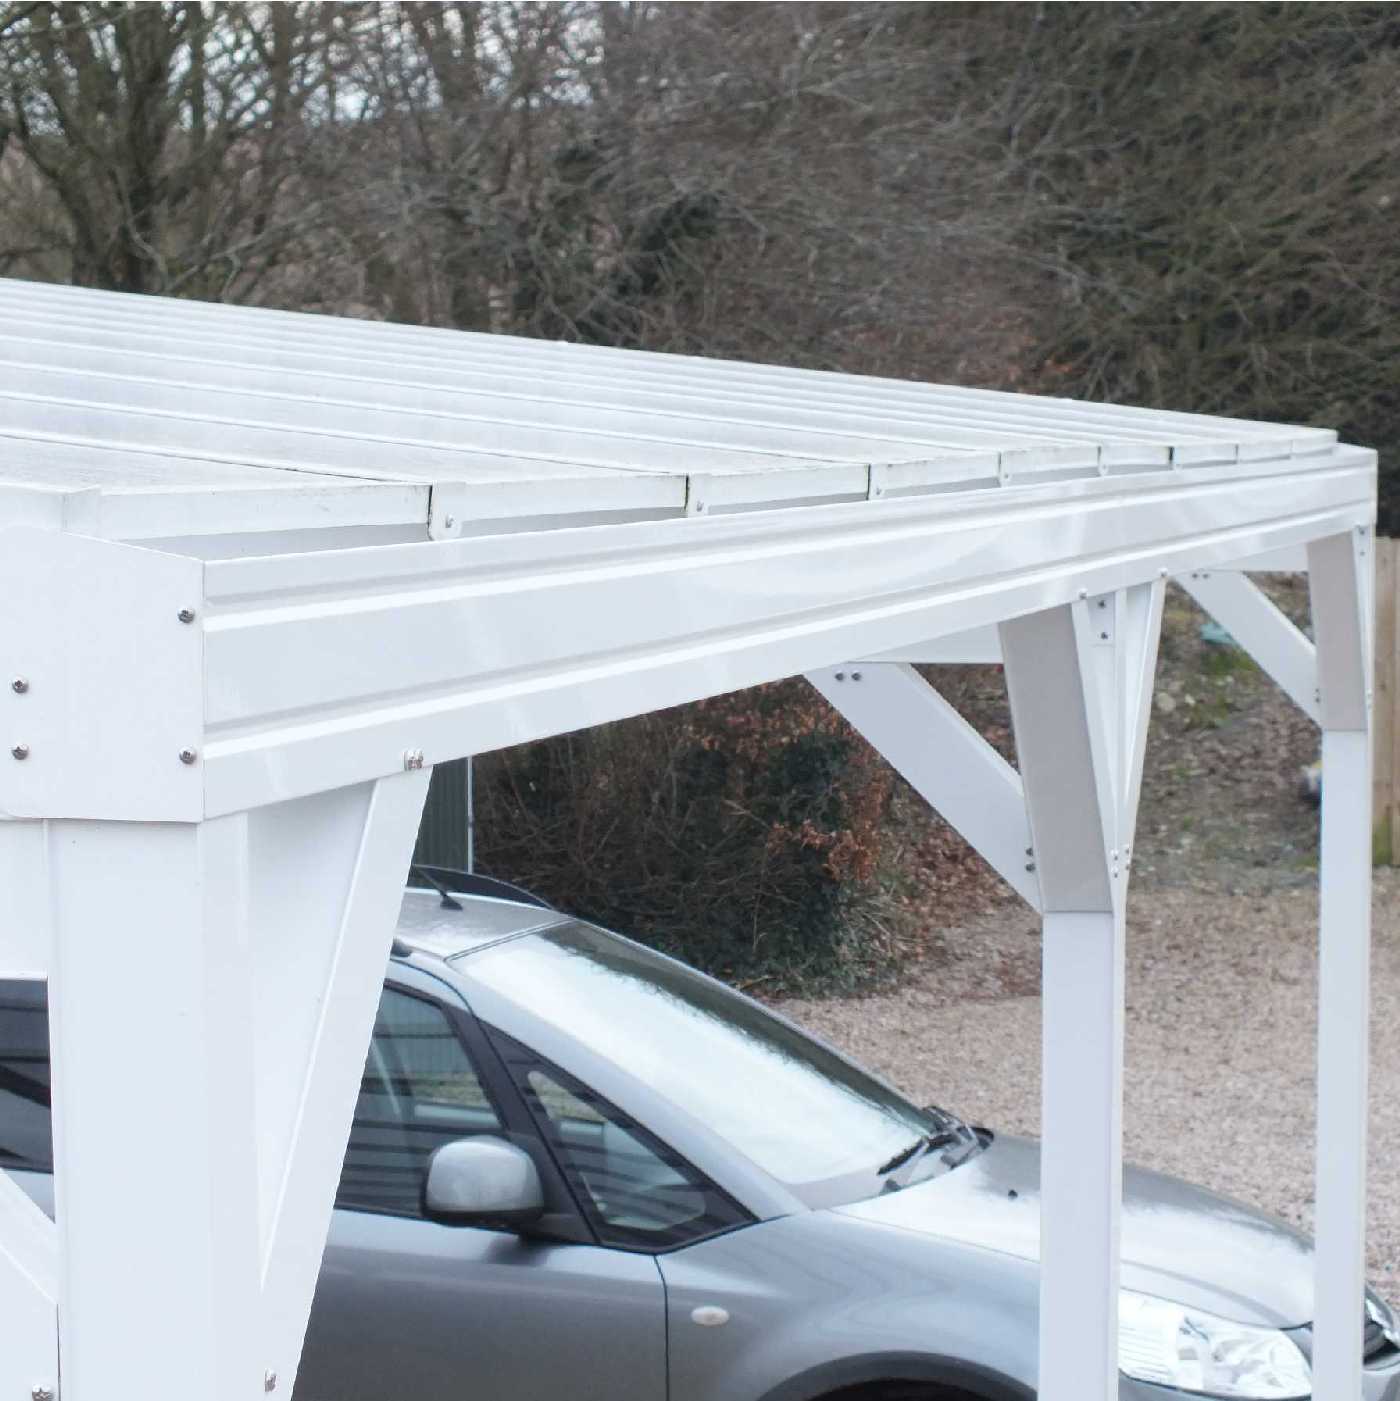 Omega Smart Free-Standing, White MonoPitch Roof Canopy with 16mm Polycarbonate Glazing - 5.6m (W) x 3.5m (P), (6) Supporting Posts from Omega Build